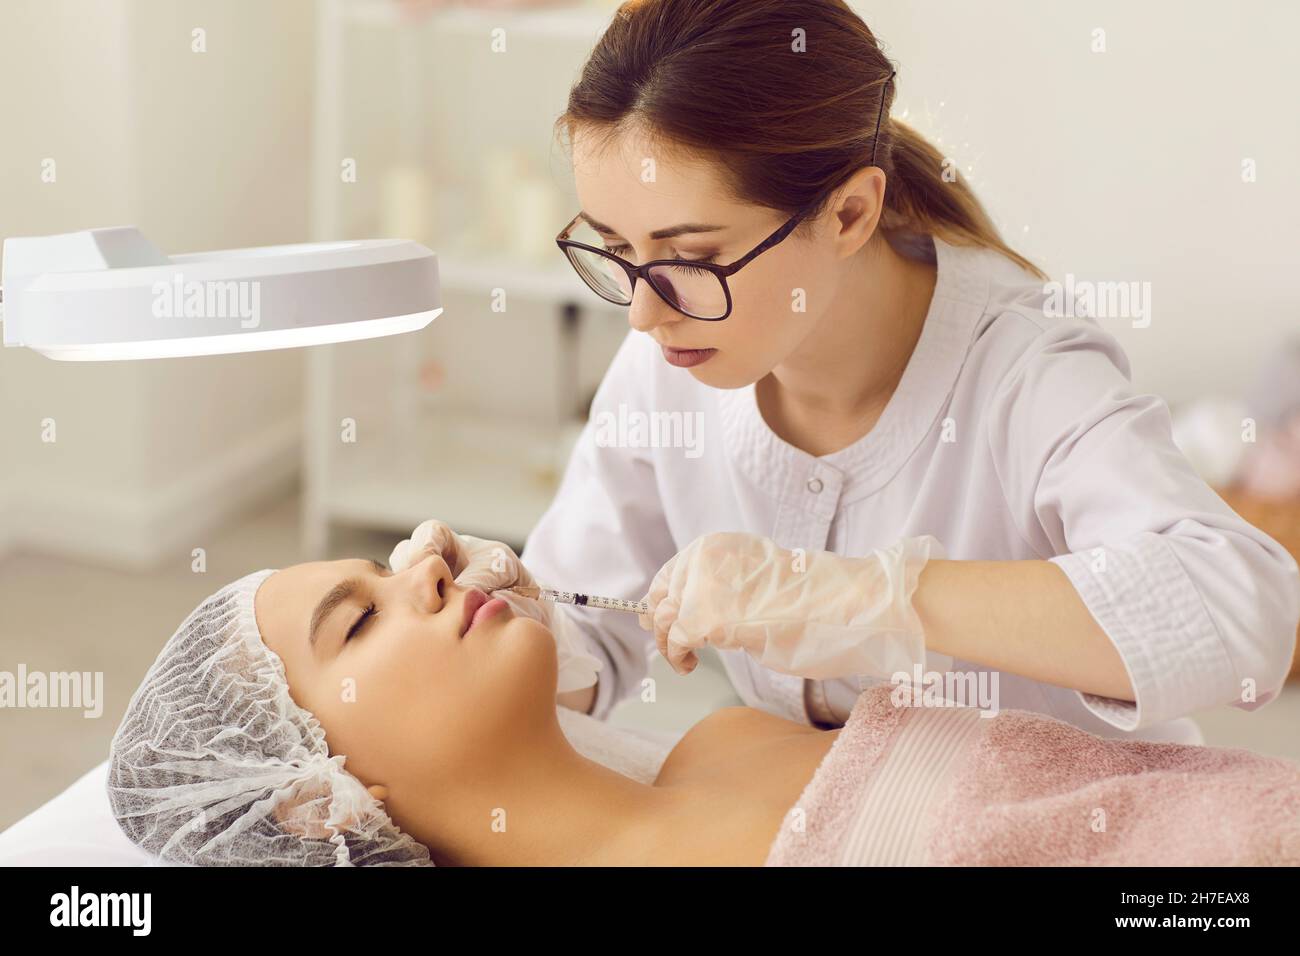 Specialist at clinic of aesthetic medicine injecting into lips of young woman Stock Photo